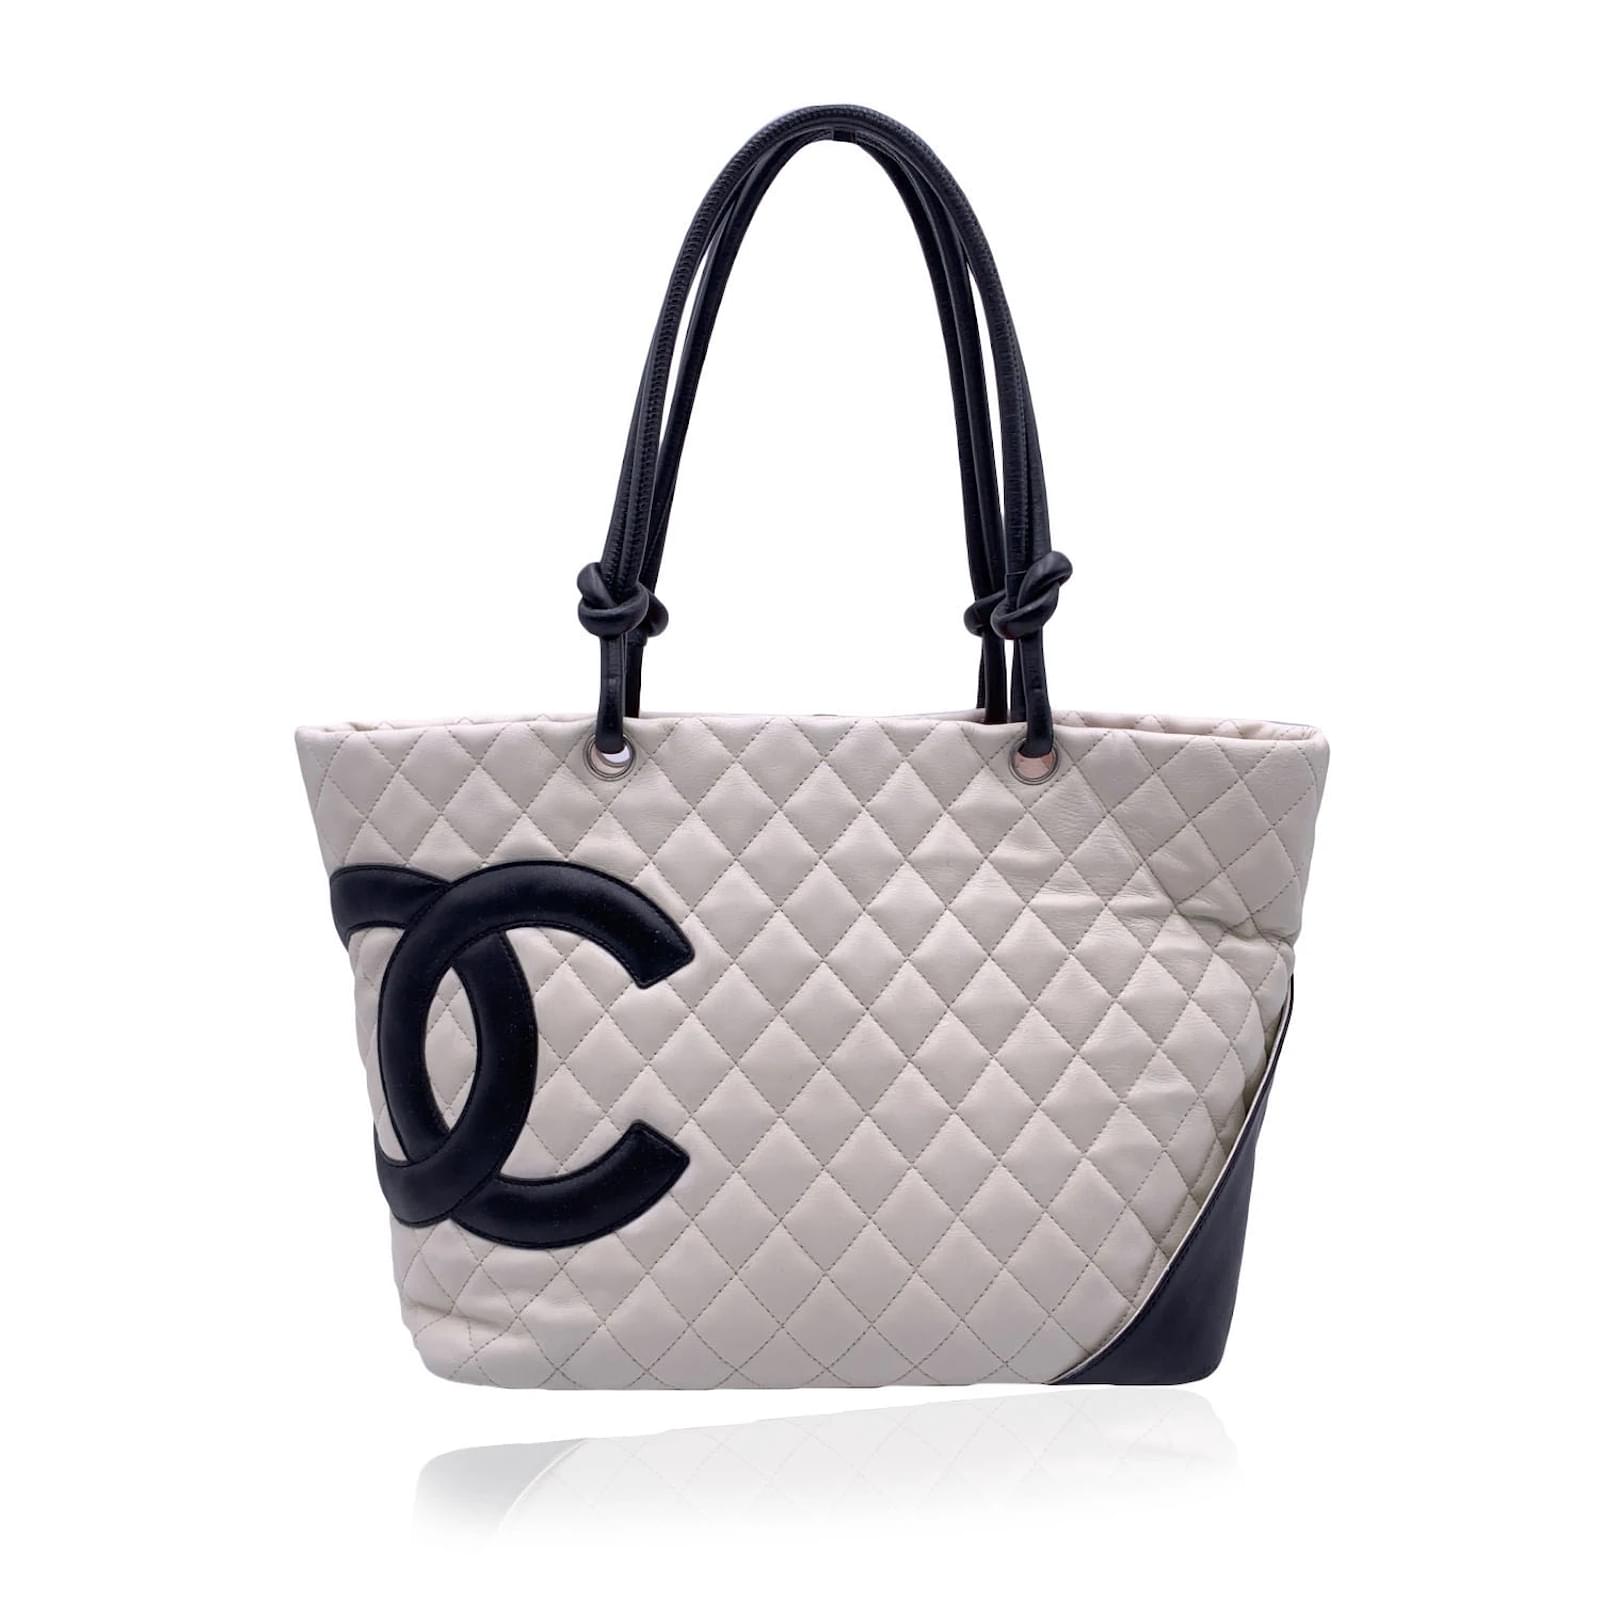 Chanel White and Black Quilted Leather Cambon Ligne Tote Bag Pink